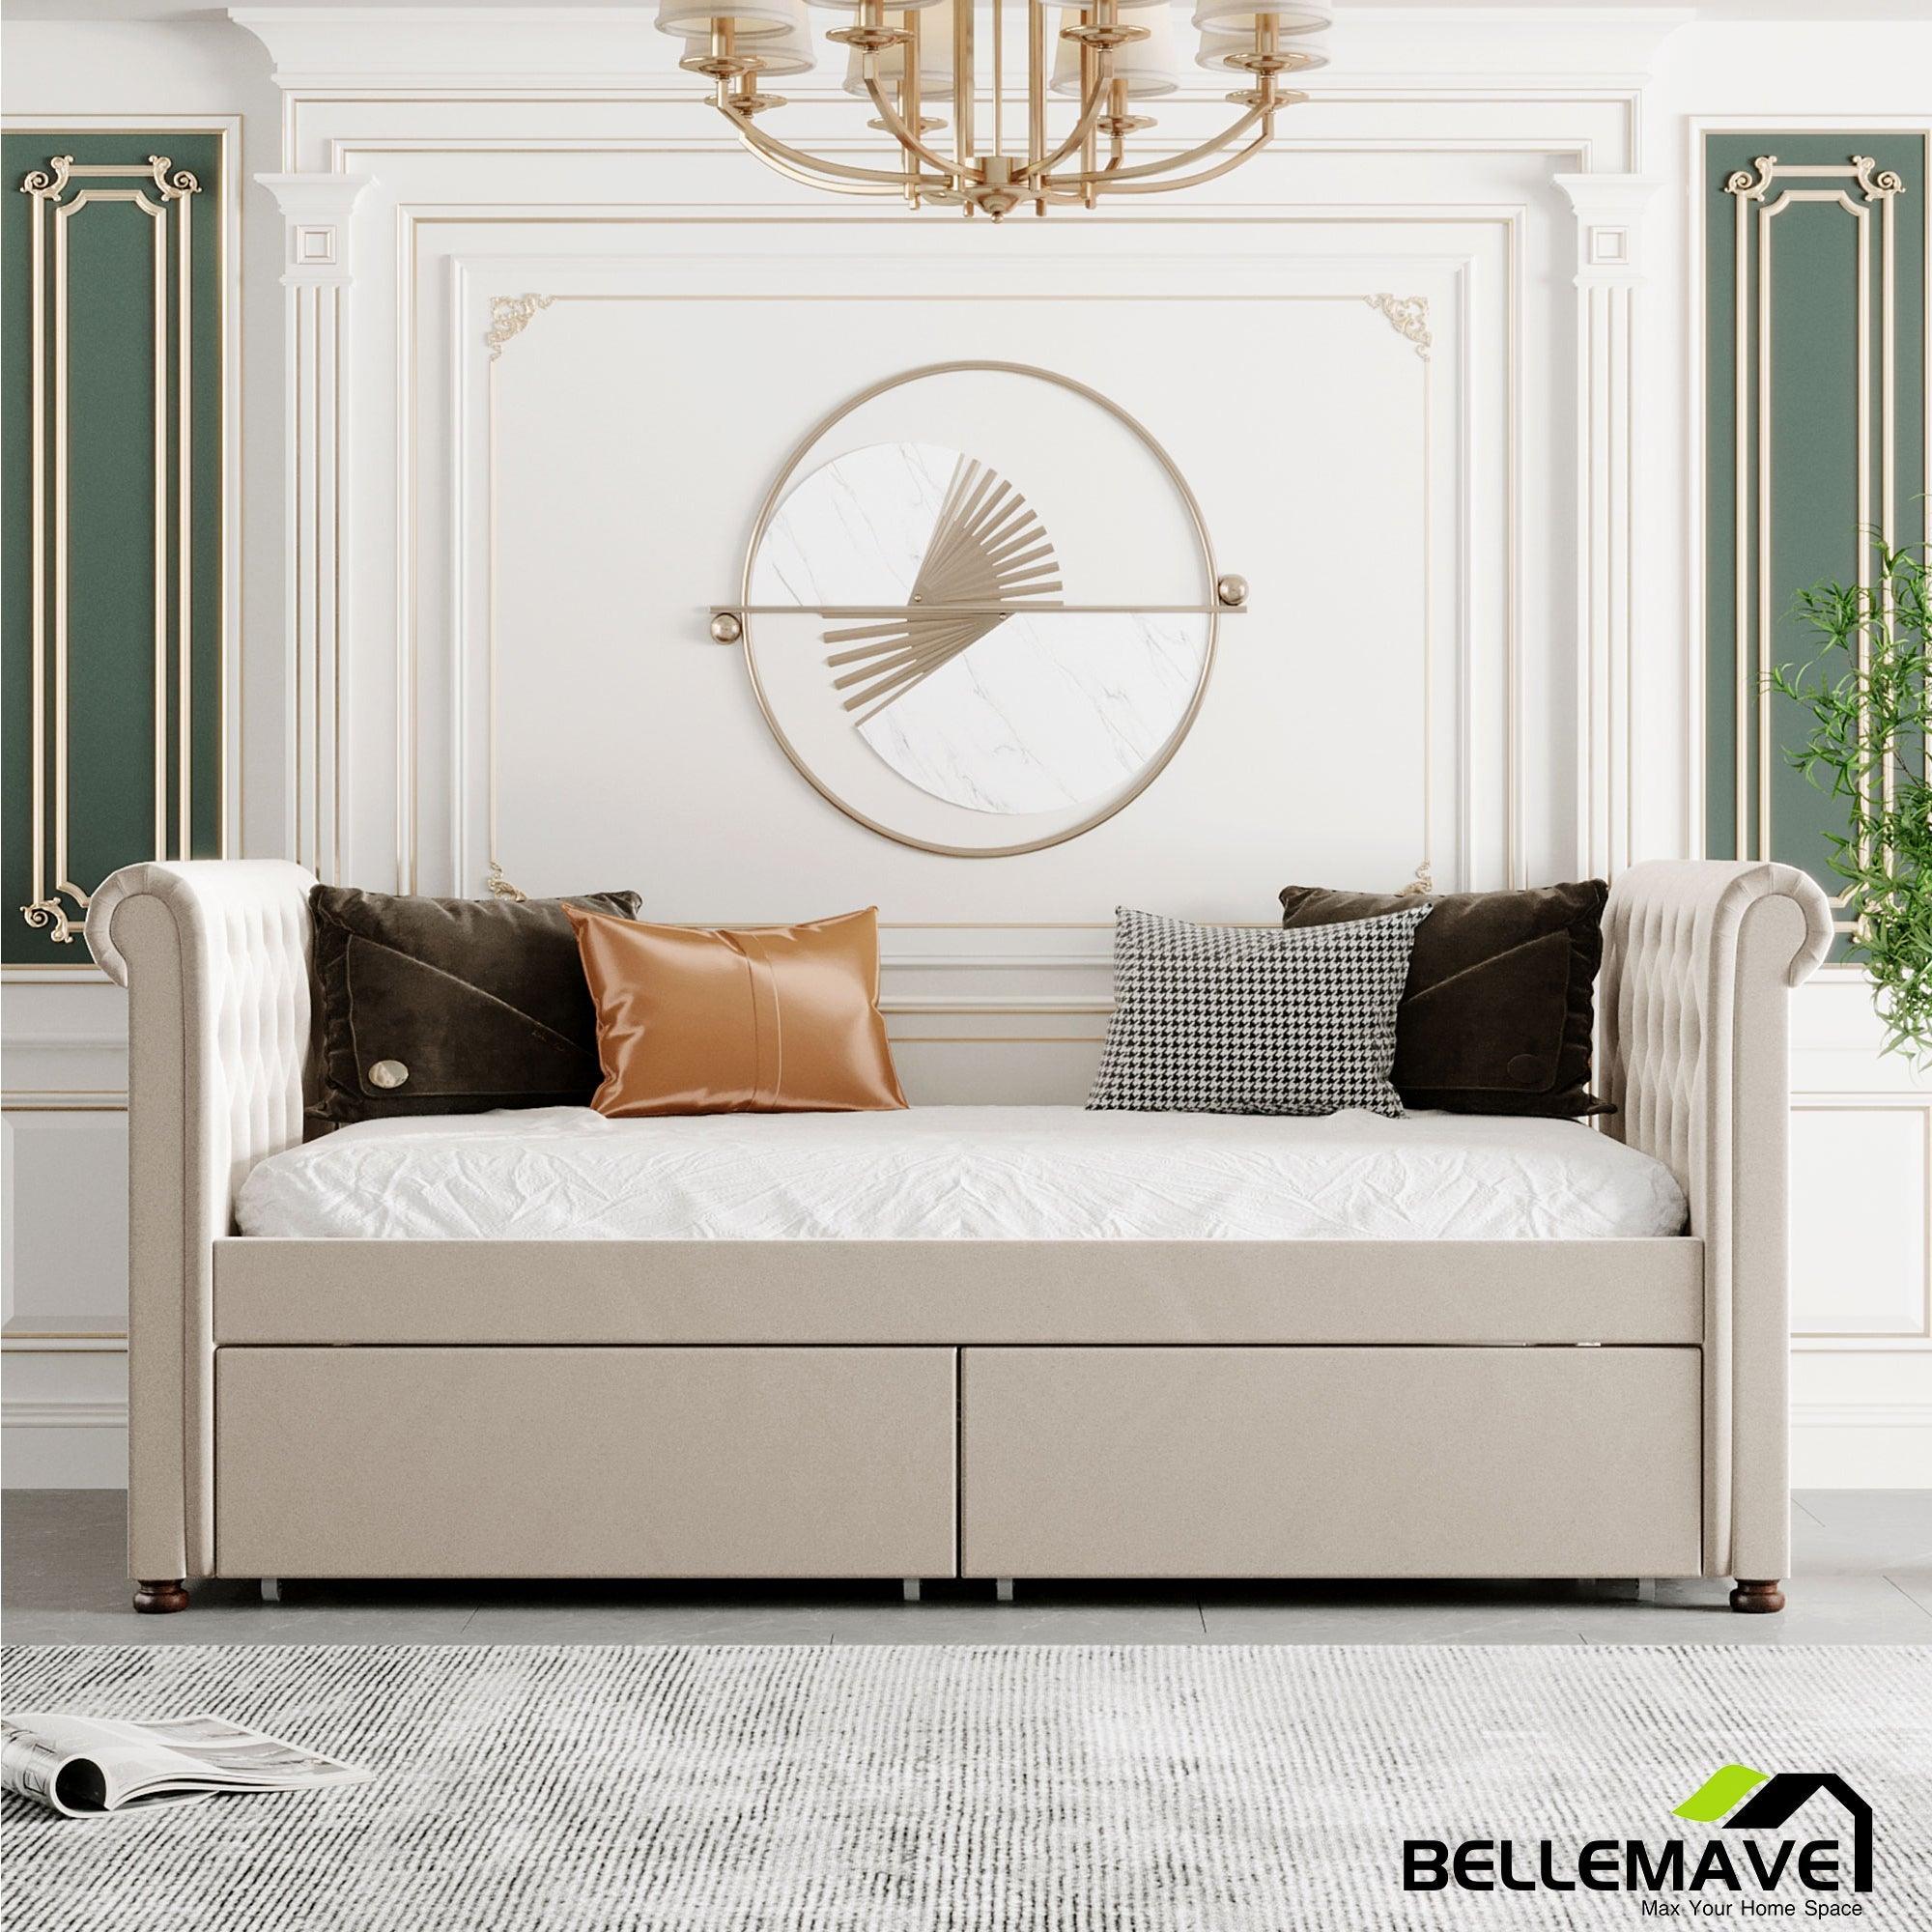 Bellemave Twin Size Velvet Upholstered Daybed with Drawers - Bellemave